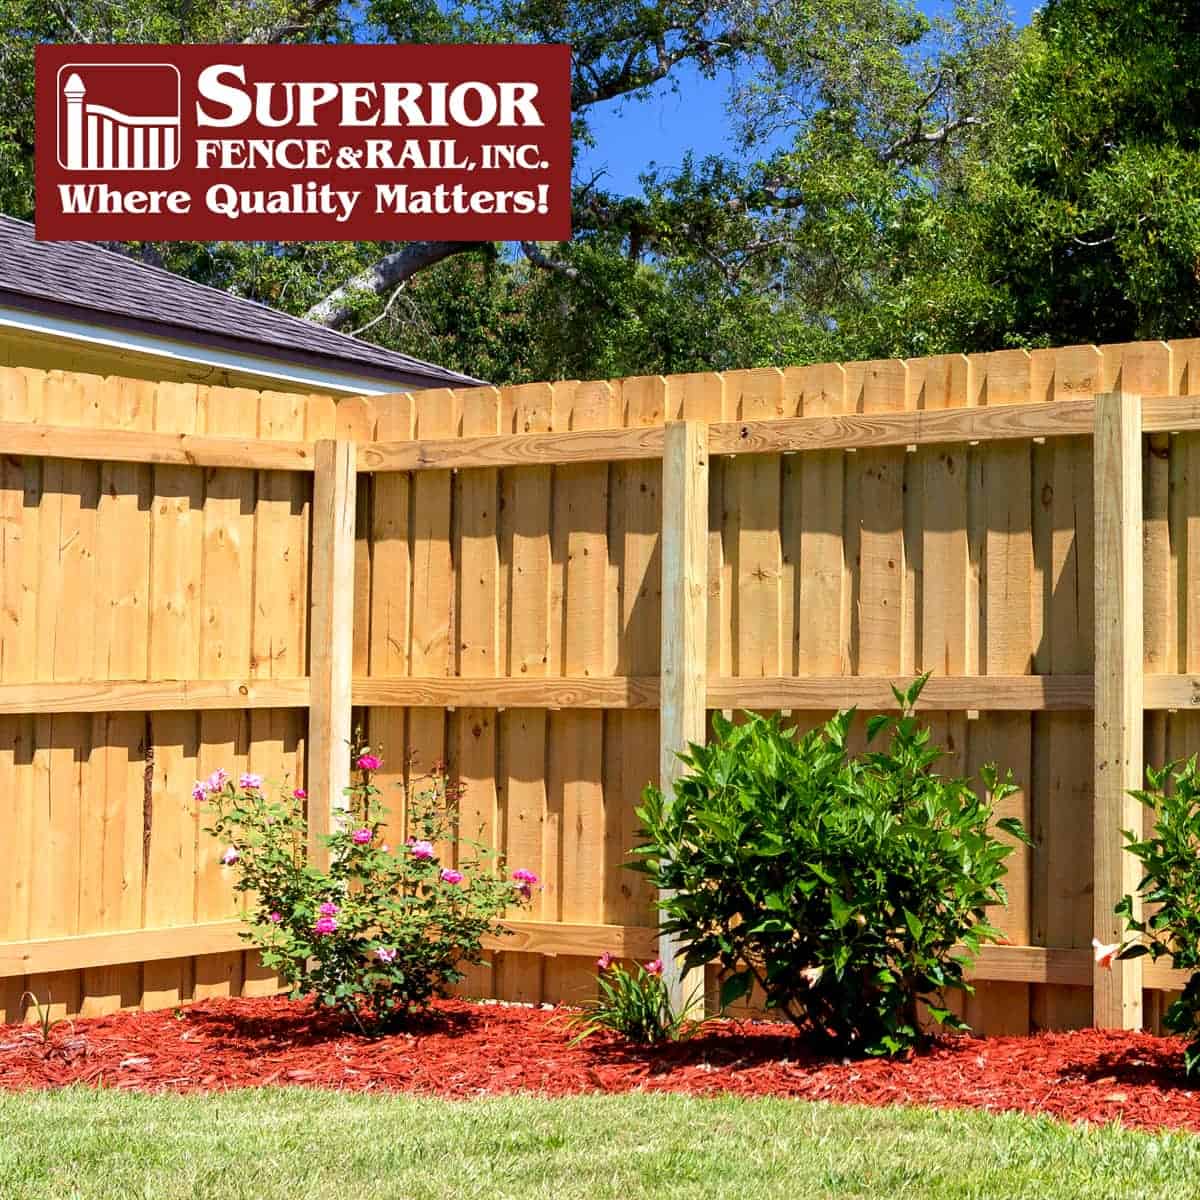 Mustang fence company contractor